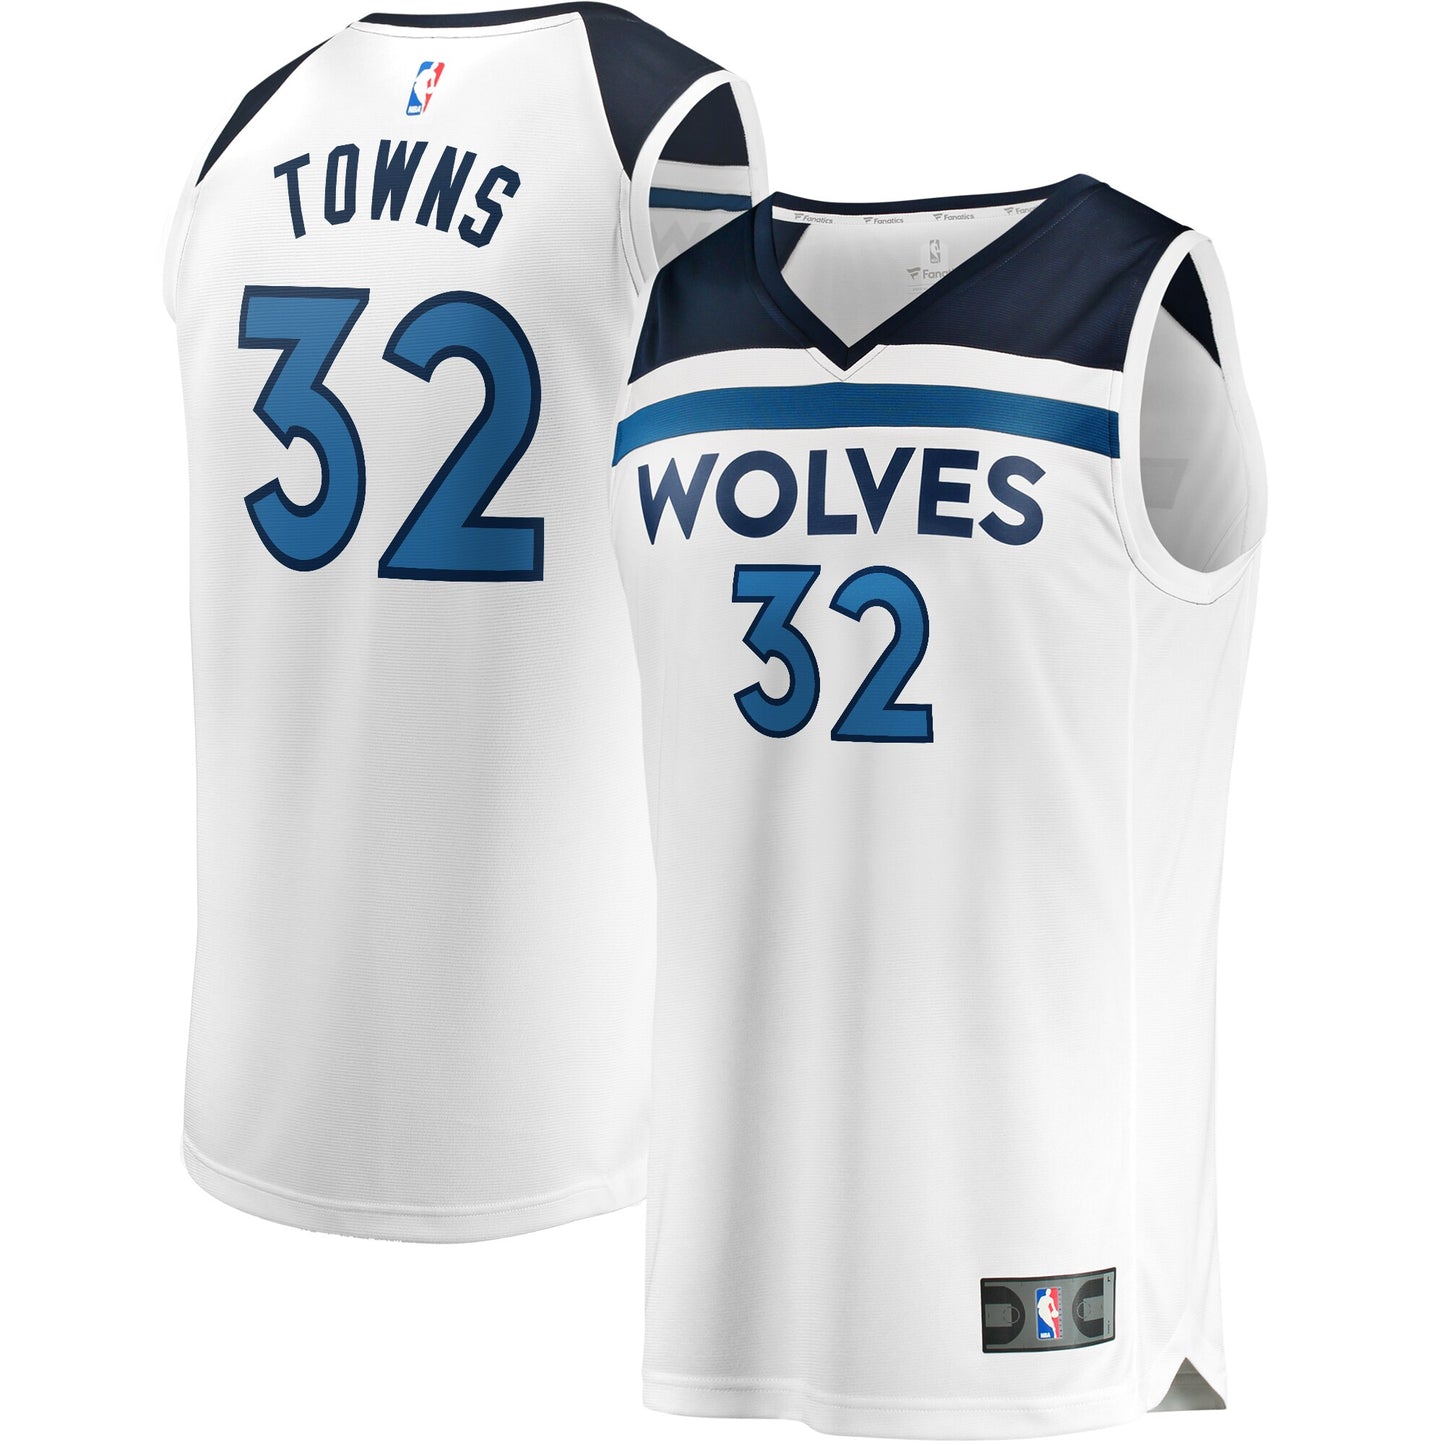 Karl-Anthony Towns Minnesota Timberwolves Fanatics Branded Youth Fast Break Replica Player Jersey - Association Edition - White